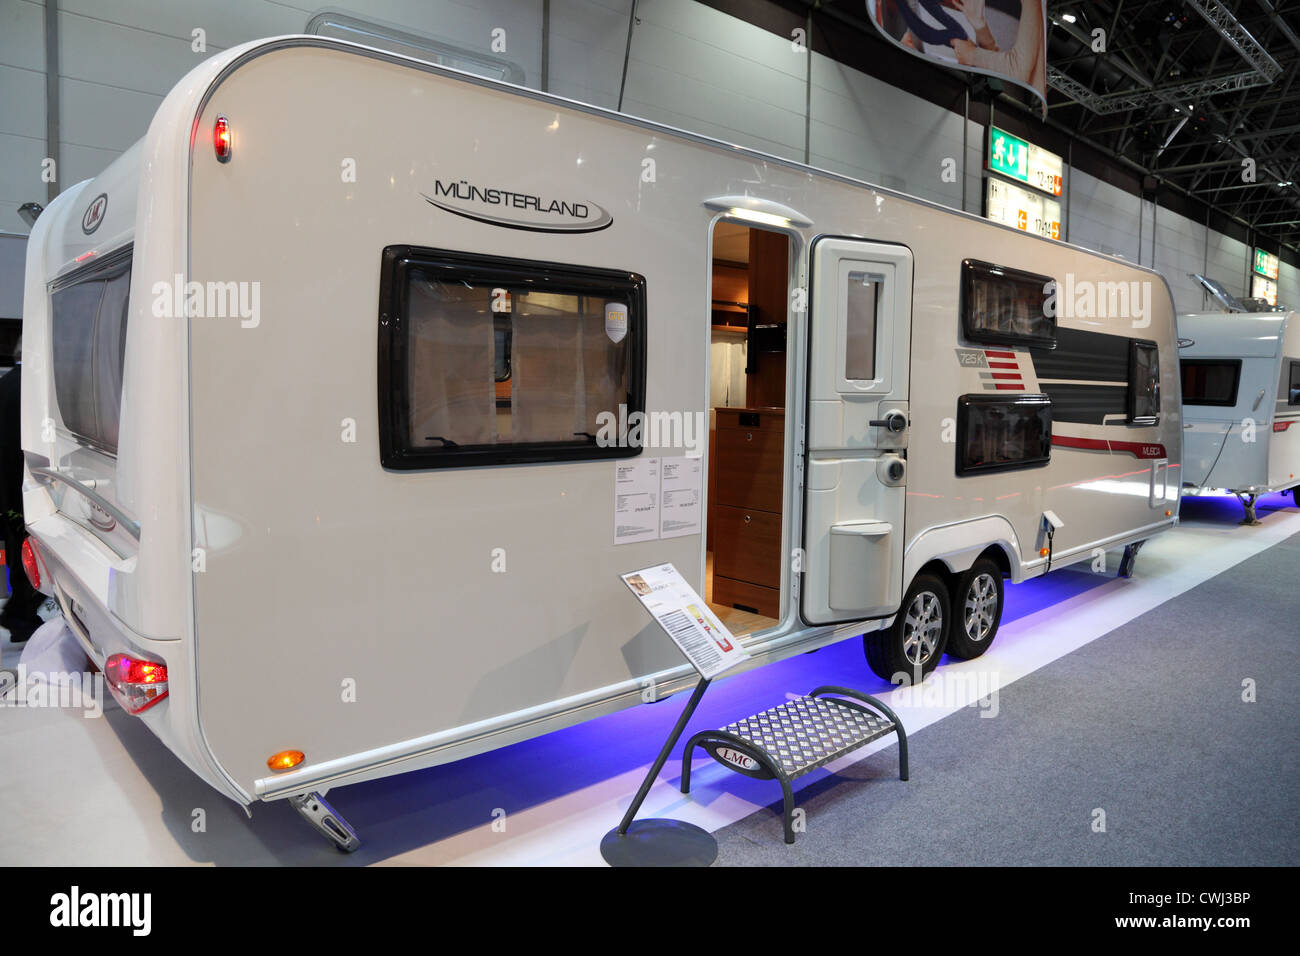 LMC Munserland mobile homes at the Caravan Salon Exhibition 2012 on August 27, 2012 in Dusseldorf, Germany Stock Photo